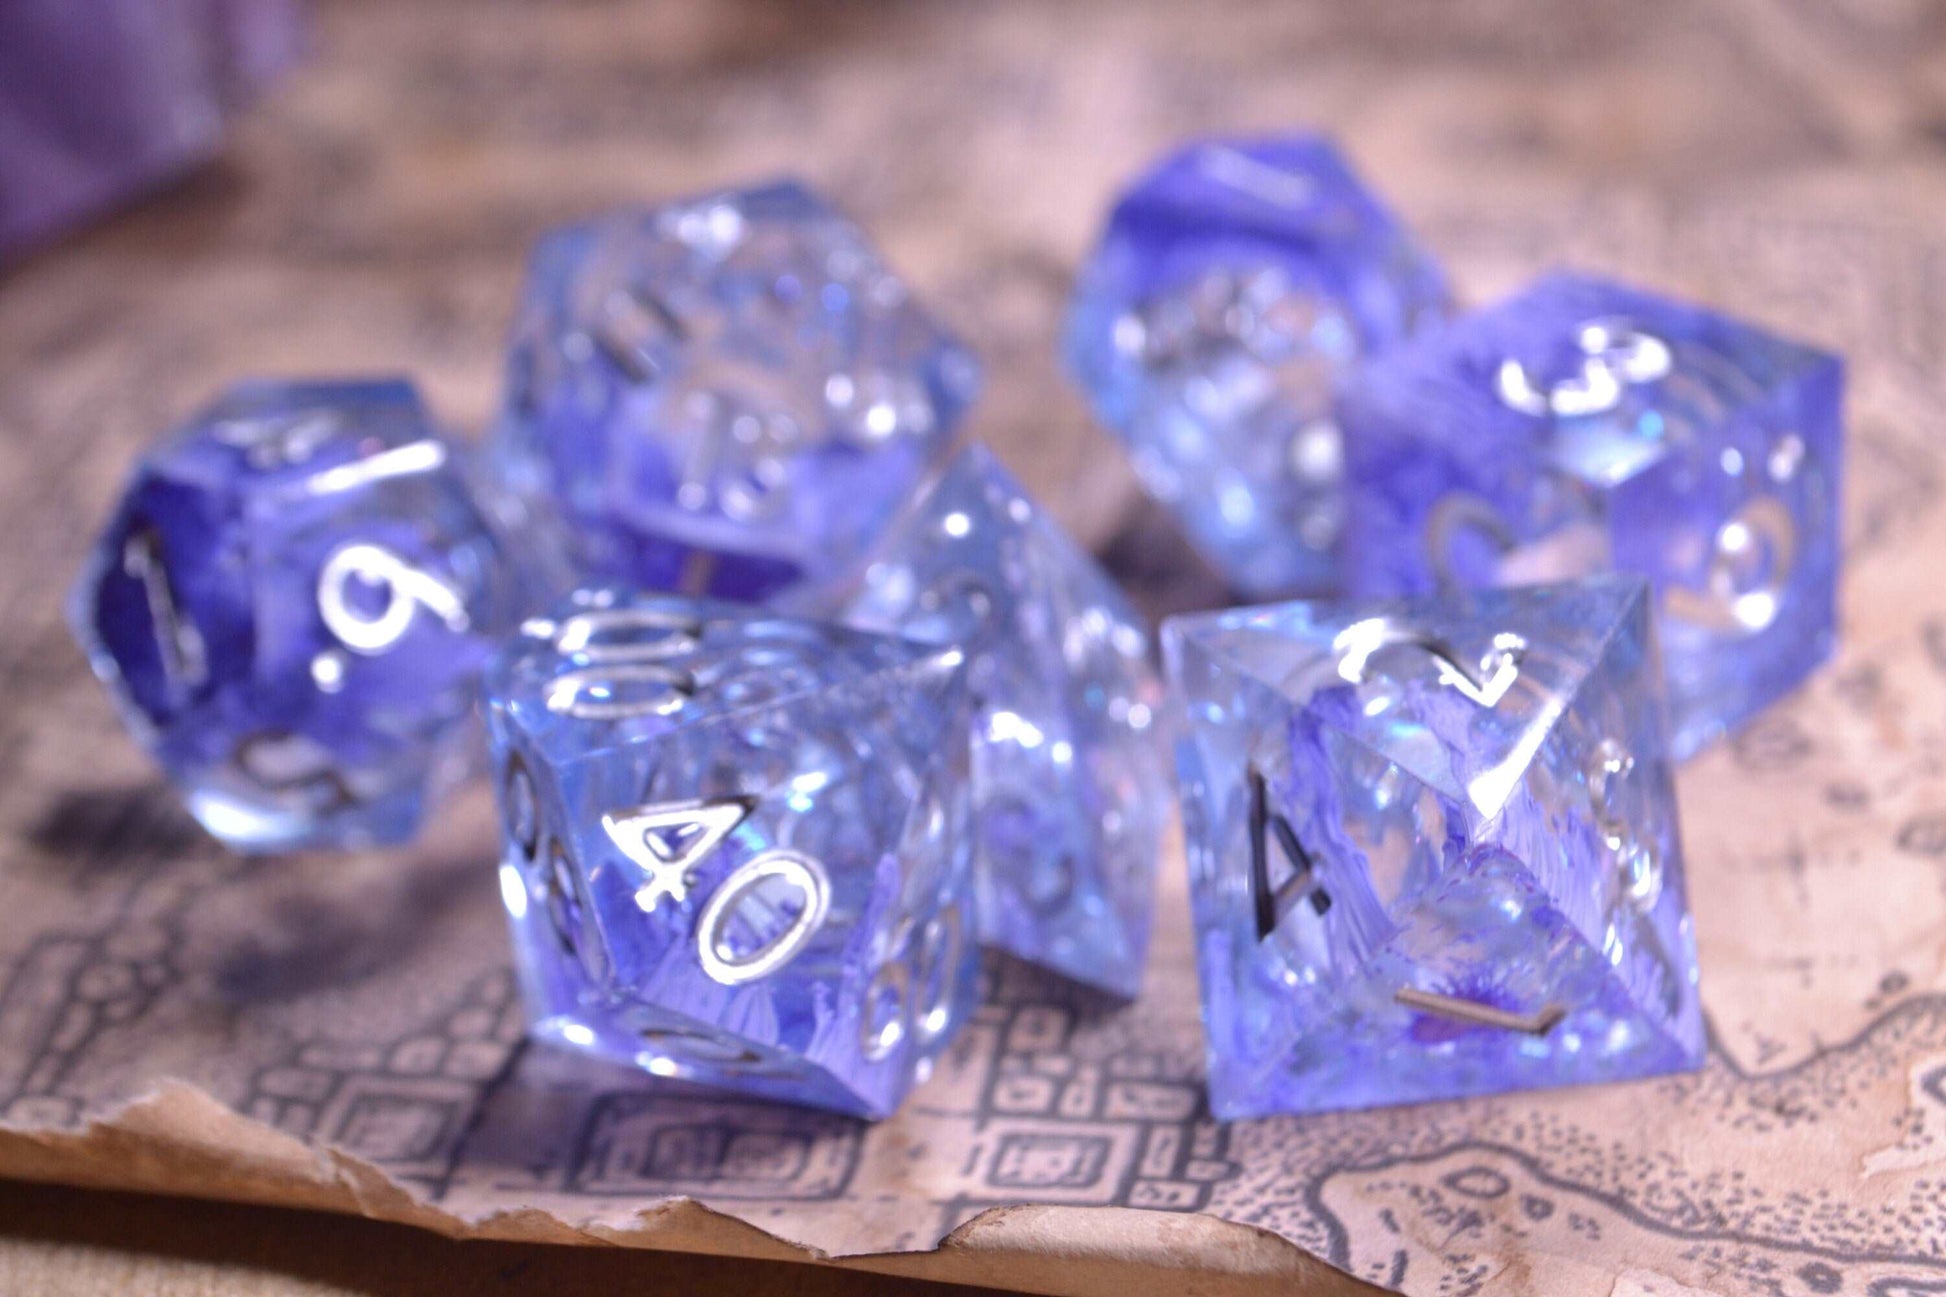 Sharp Edge Resin Liquid Core DnD Dice Set - Fae Ink Purple Silver Metallic Numbers - For Dungeons and Dragons - Gift Set